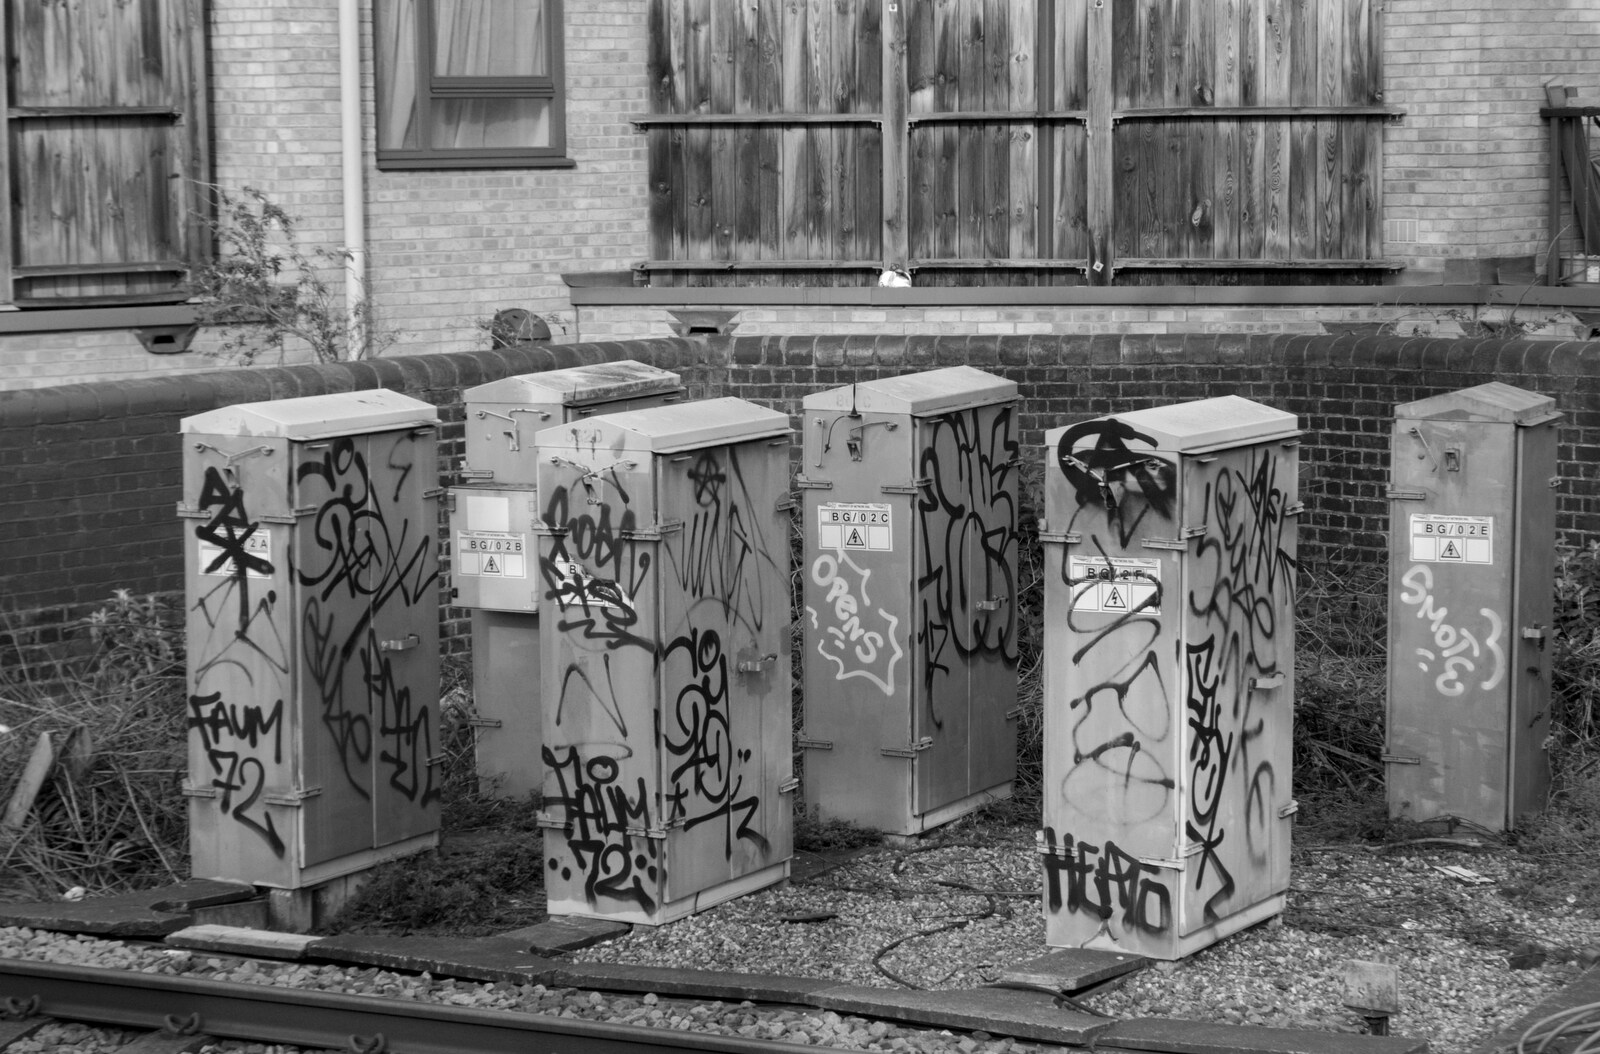 A group of well-tagged electrical cabinets from Another Trip to Nandos, Bayswater, London - 26th February 2020